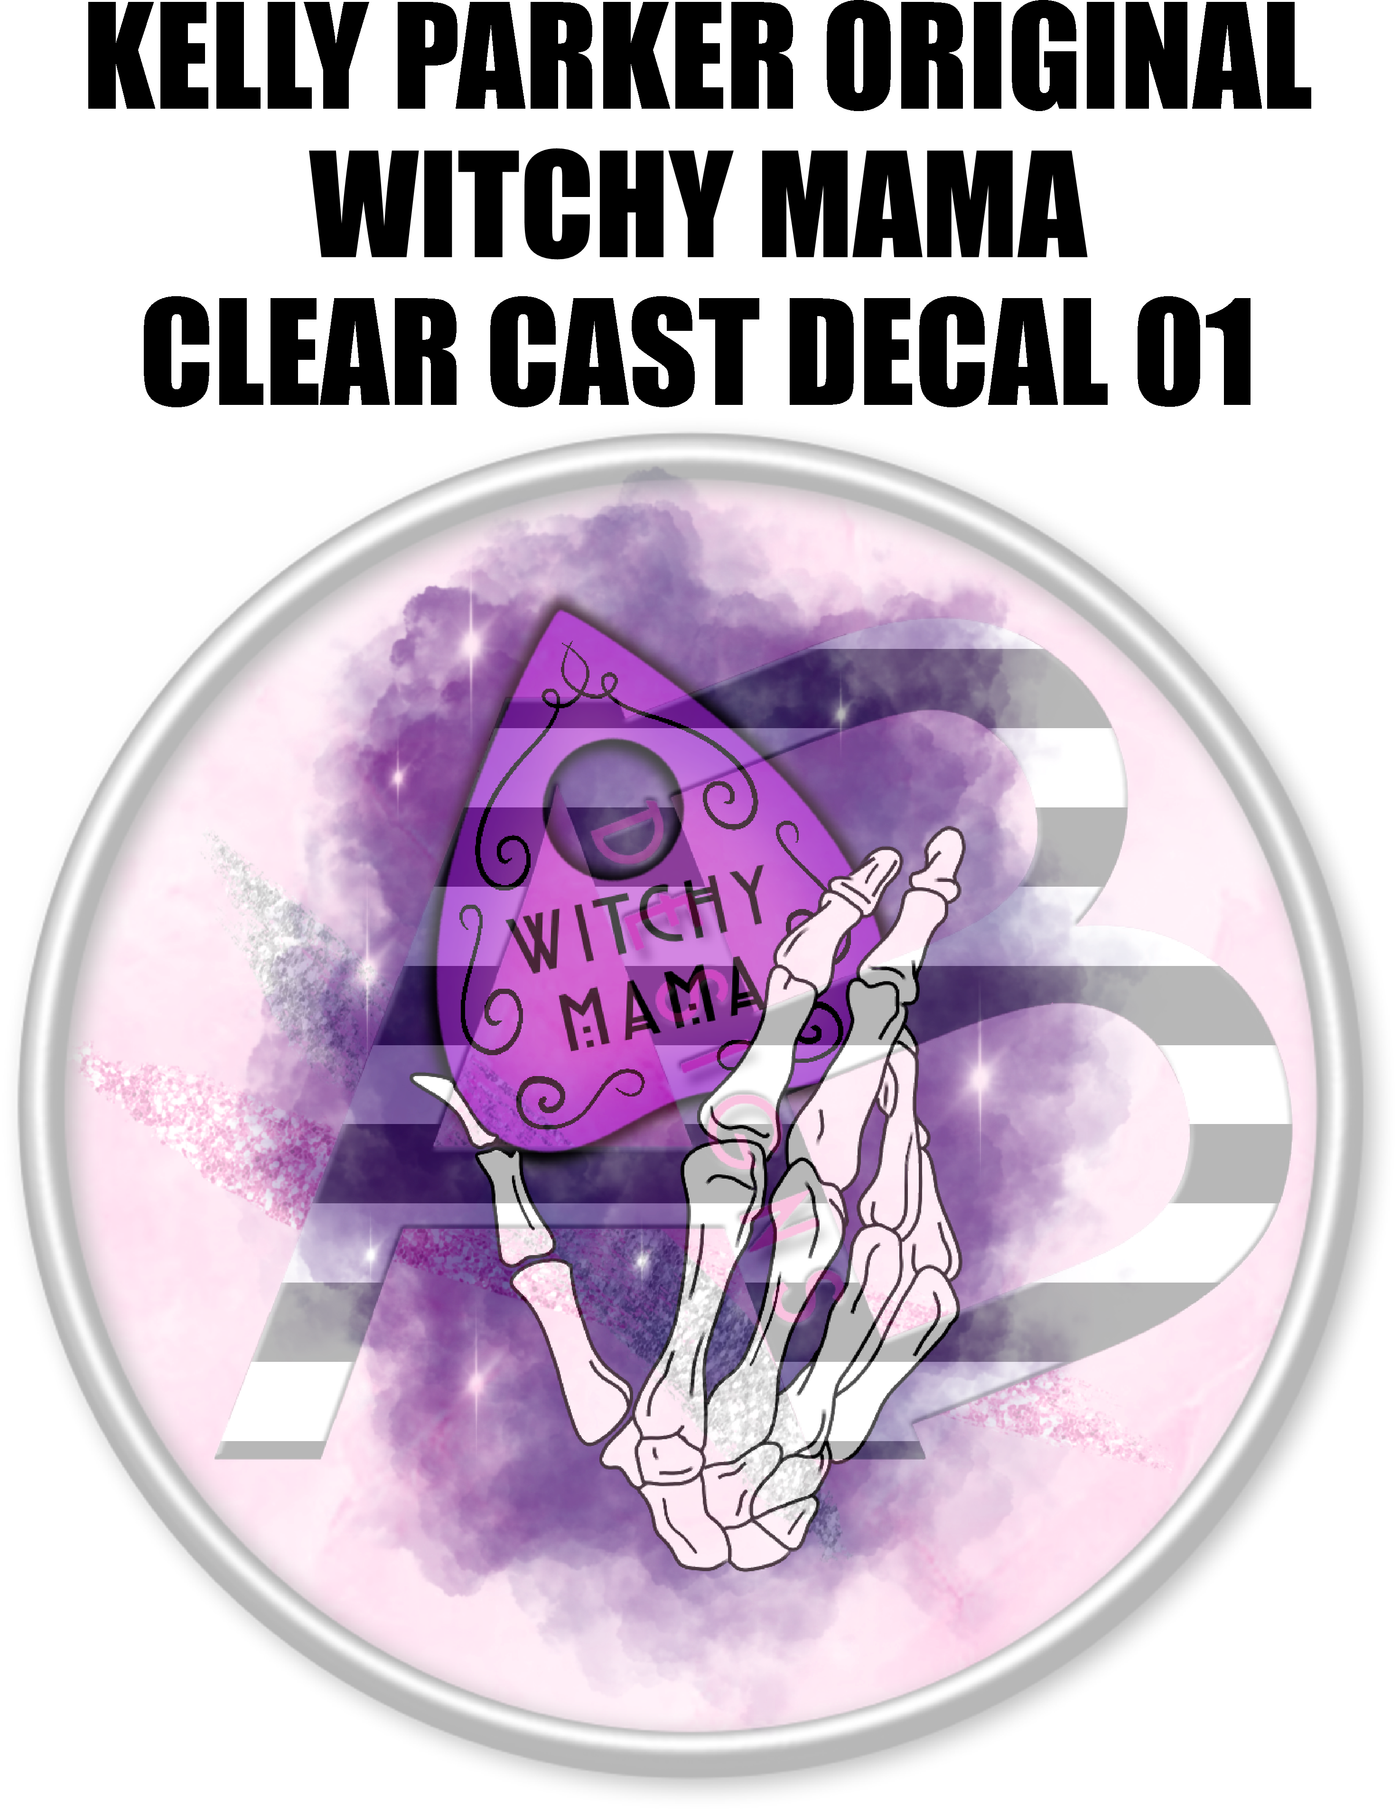 Kelly Parker ORIGINAL Witchy Mama - Clear Cast Decal